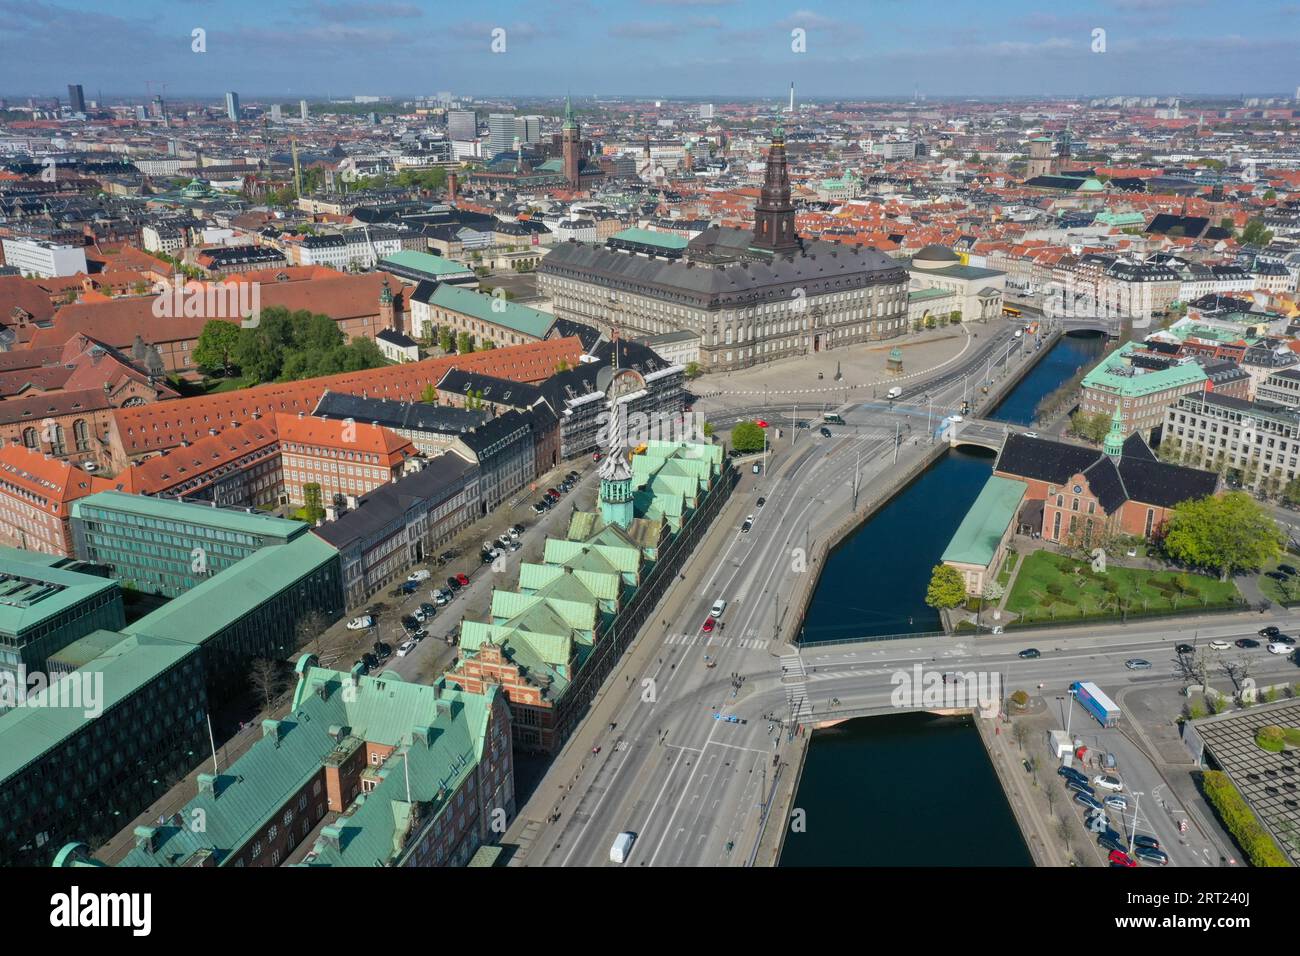 Copenhagen, Denmark, May 07, 2020: Aerial drone view of Christiansborg Palace and the former stock exchange building Stock Photo